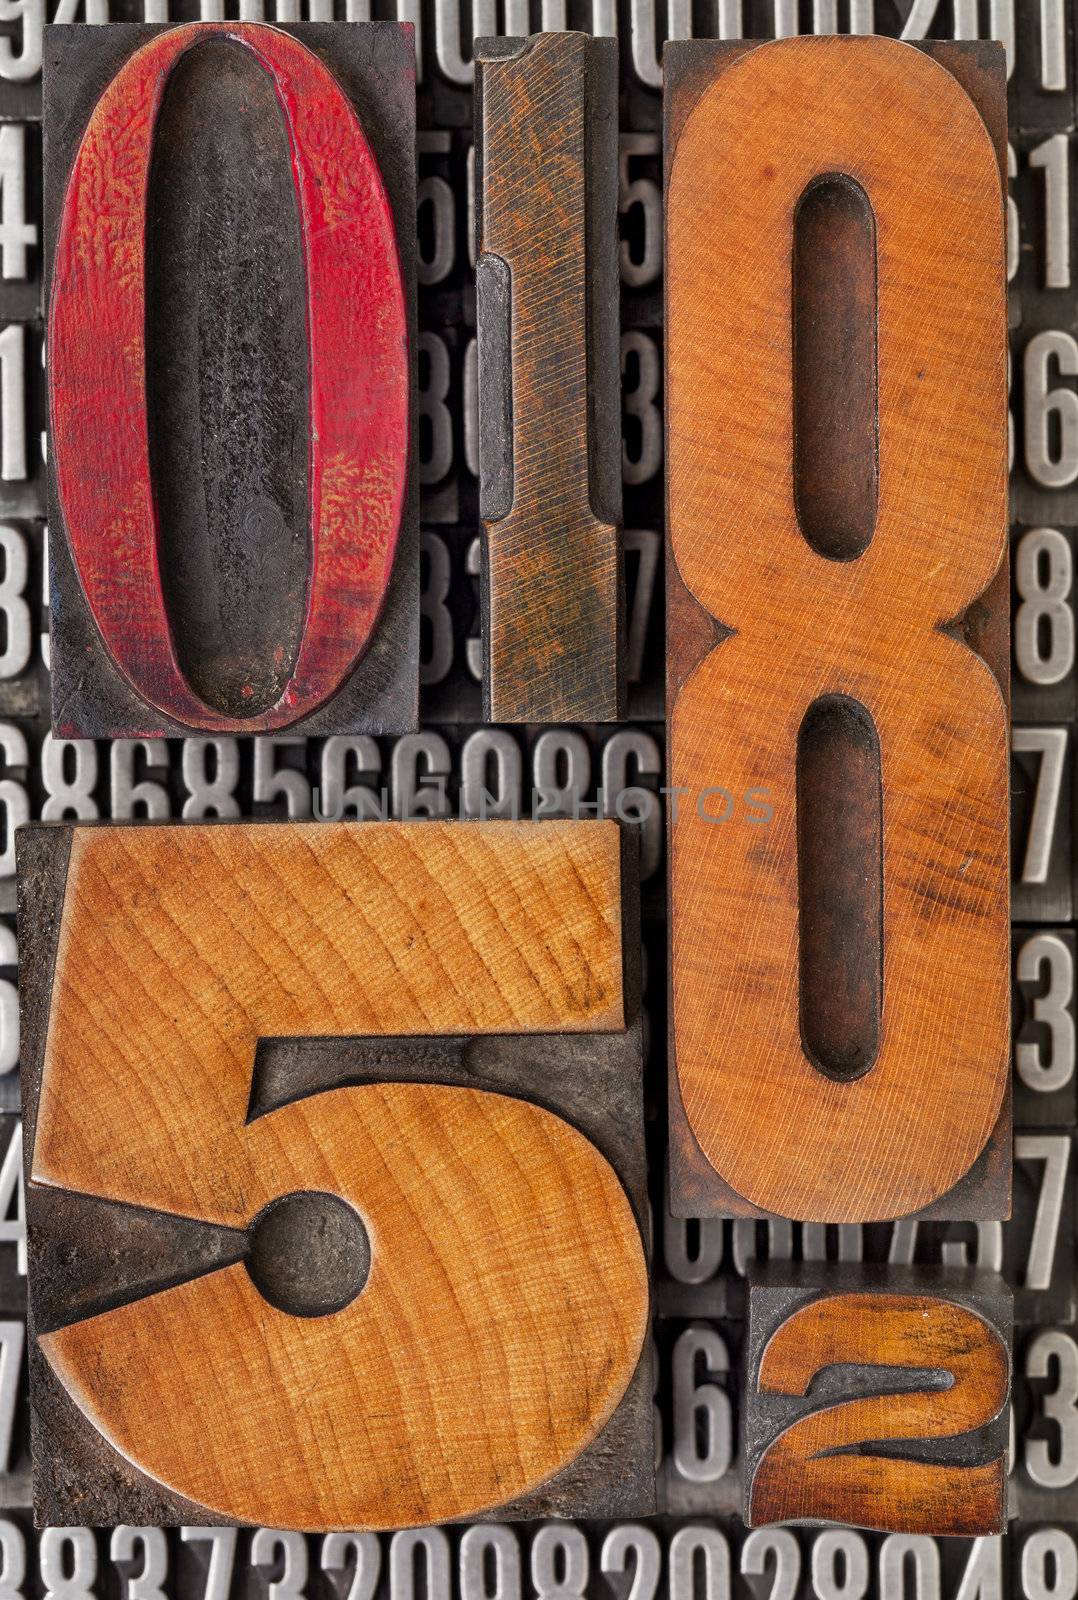 number abstract - vintage  letterpress wood type stained by color ink over metal typeset